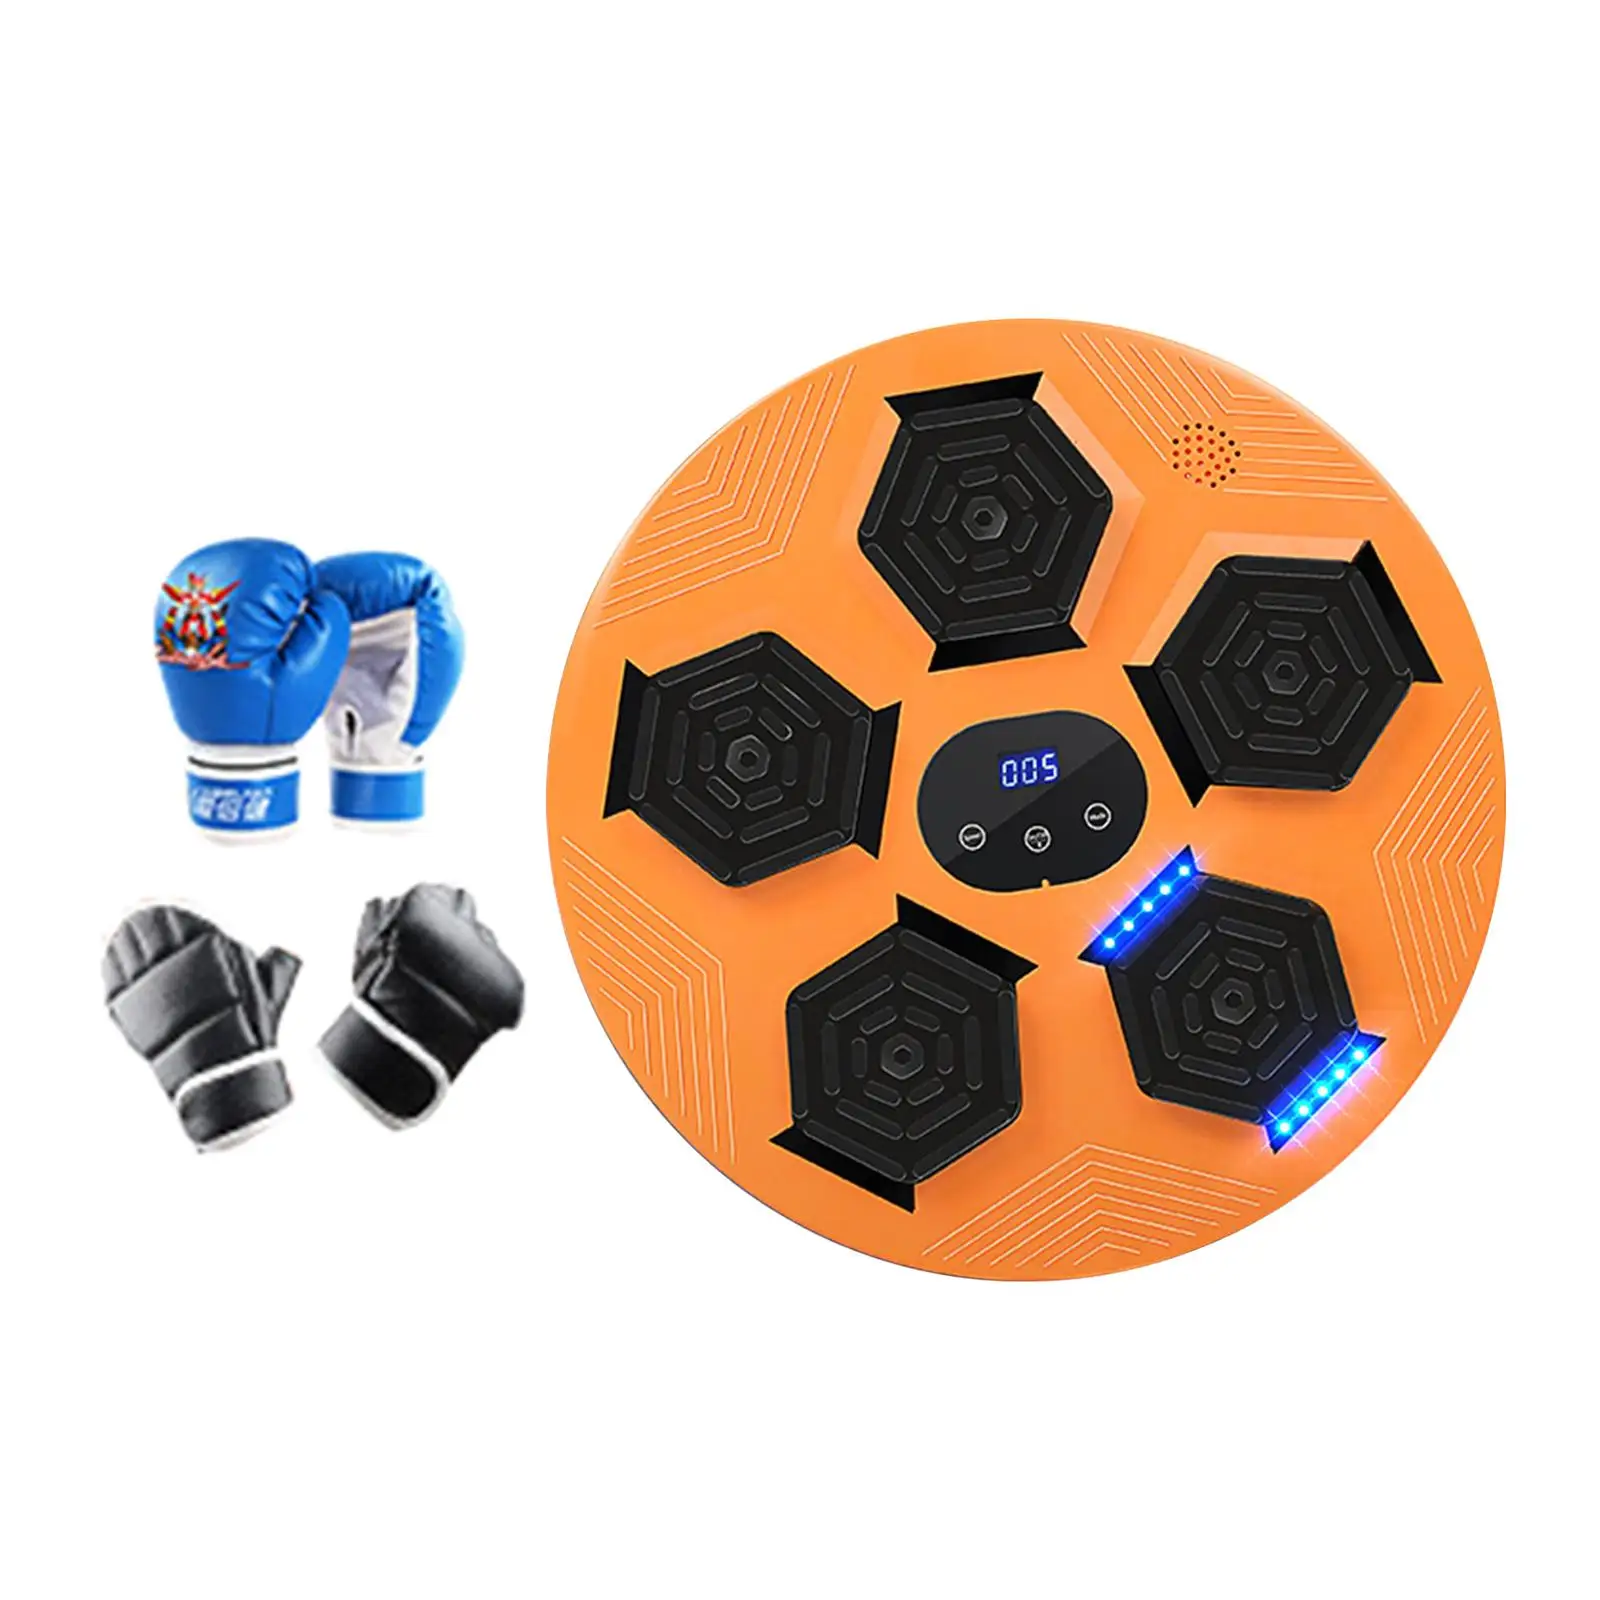 Music Boxing Machine Sports Martial Arts Electronic Wall Mount Adults Kids Musical Target Improves Agility Reaction Times